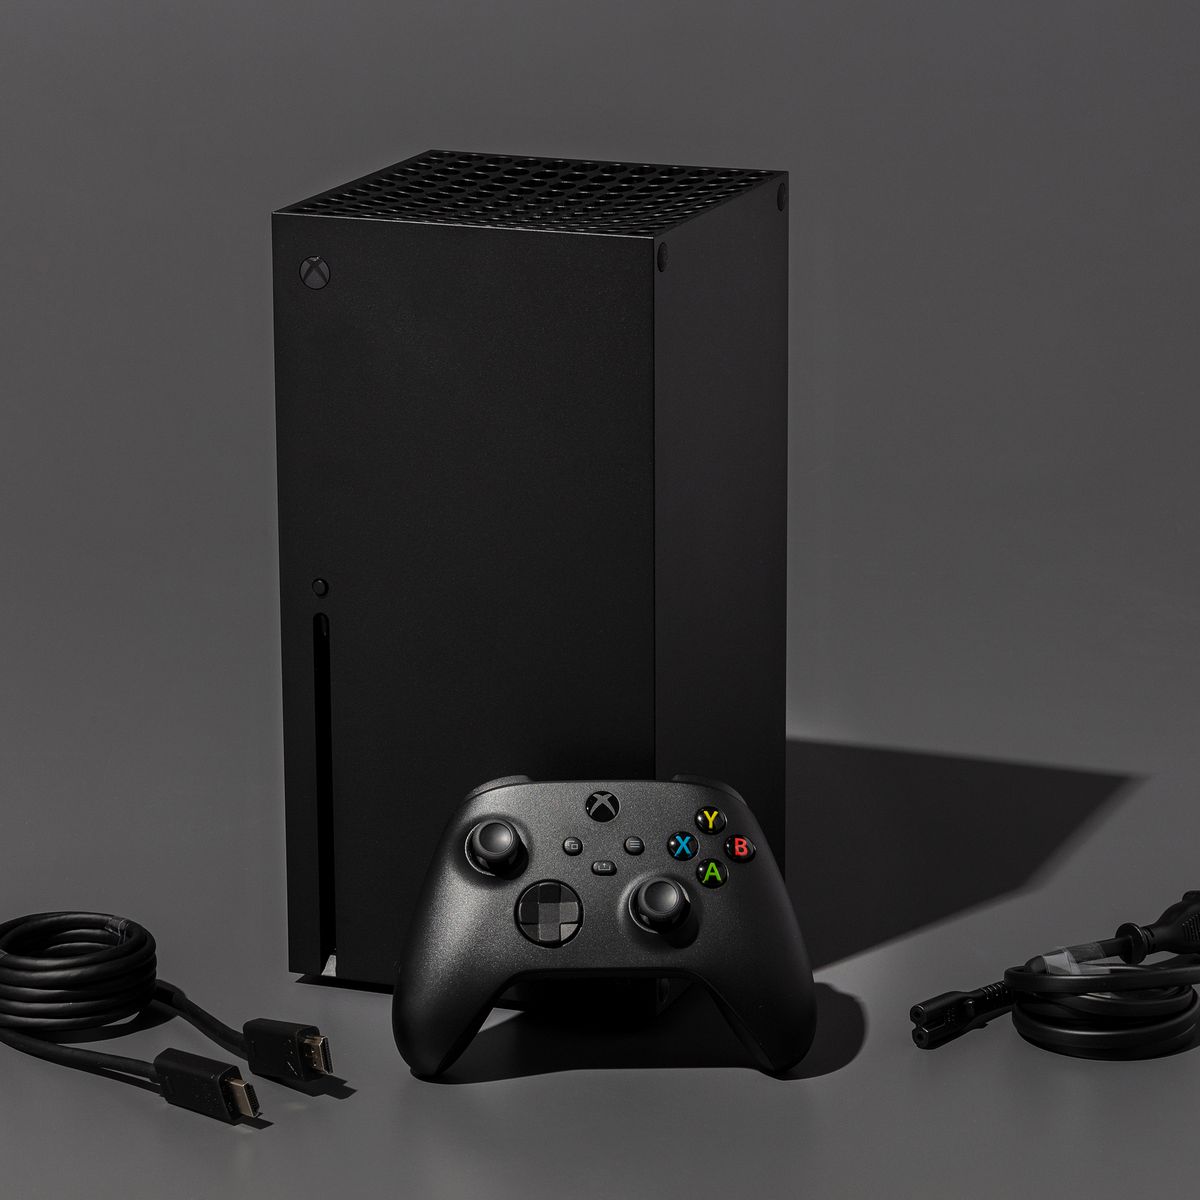 Xbox Series X video game console photographed on a dark gray background